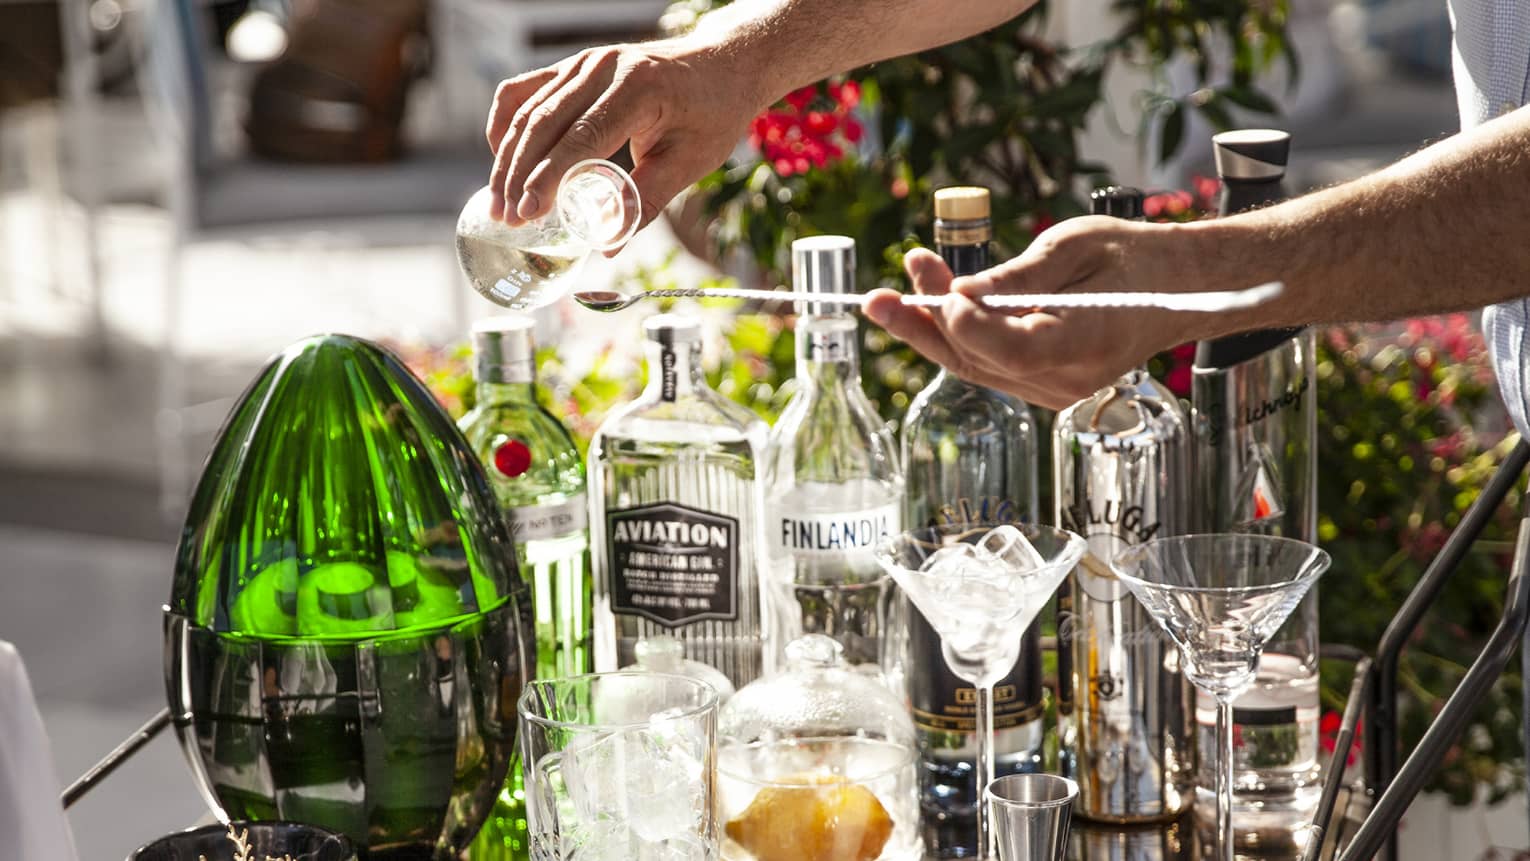 Man pours a drink at outdoor cocktail service cart with various glass bottles